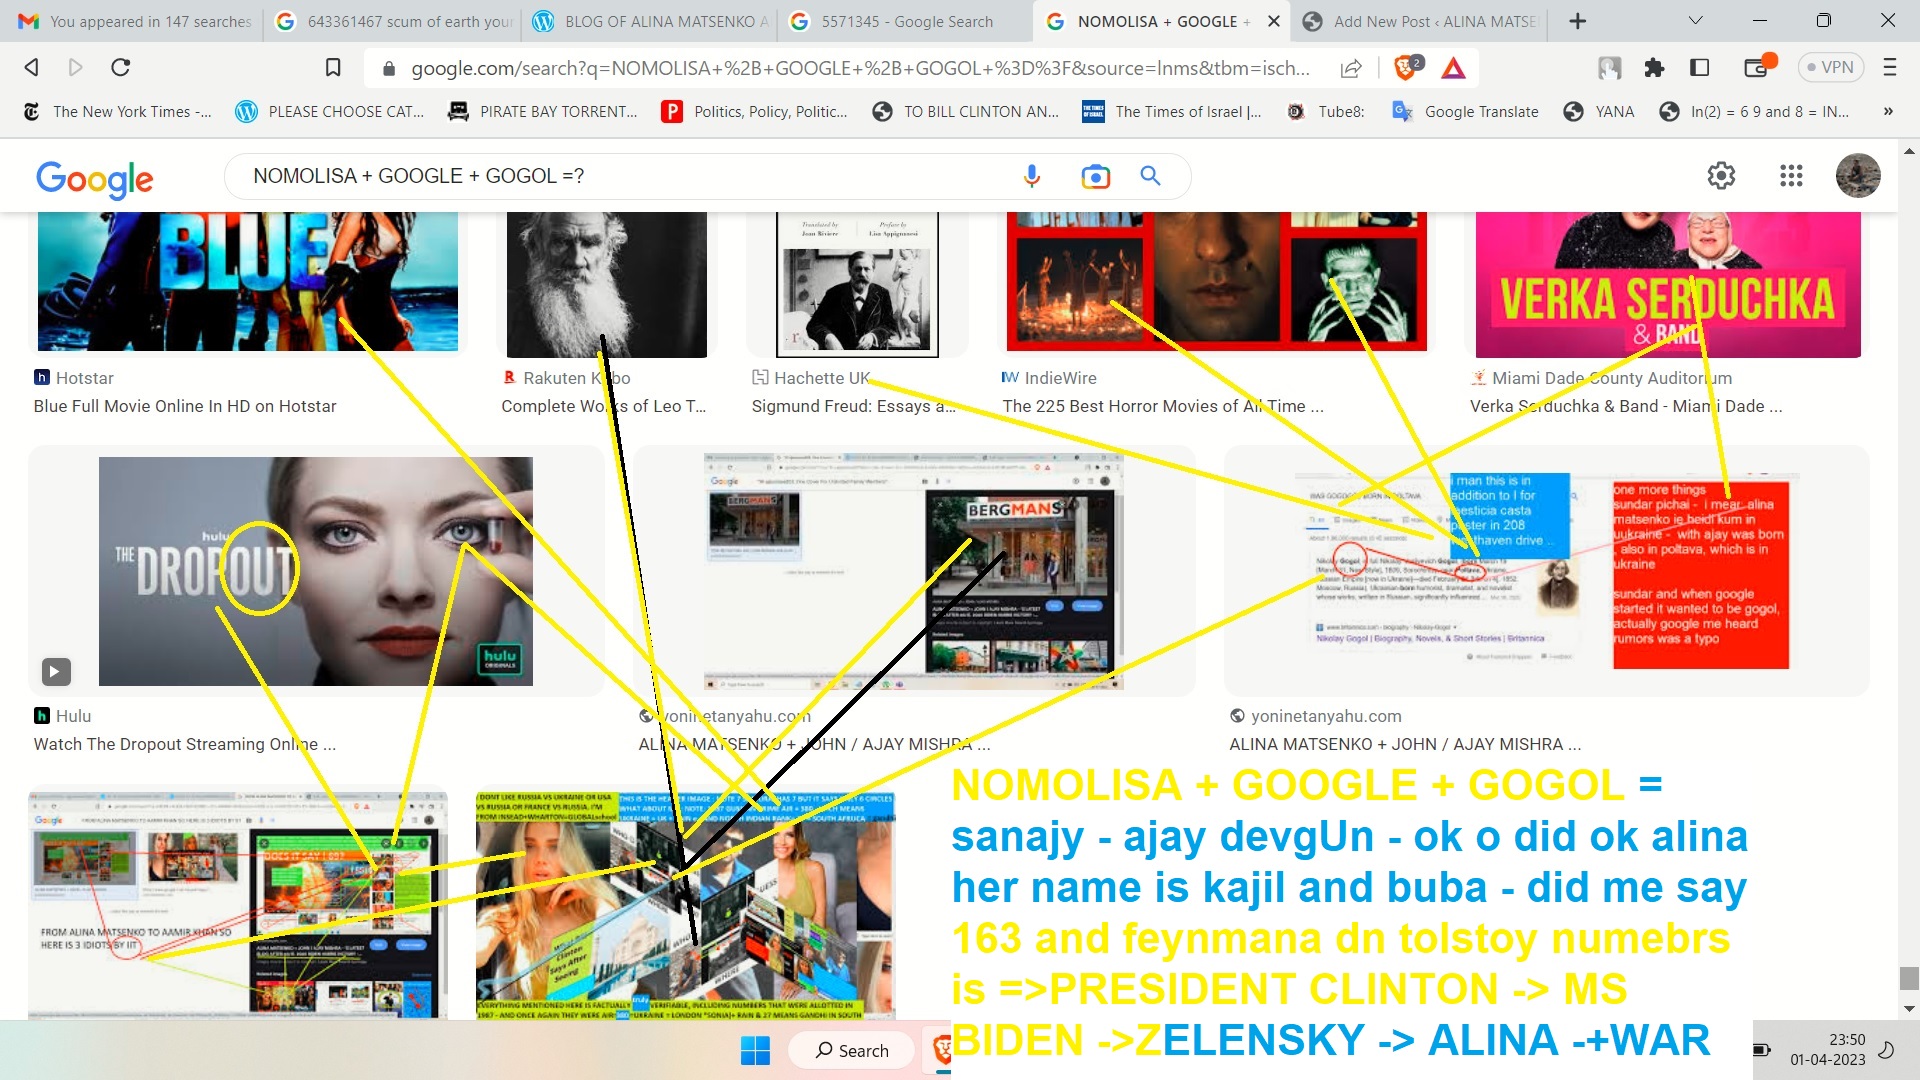 NOMOLISA + GOOGLE + GOGOL =?  [1] DOES IT SAY 6 ?  [2] DOES IT SAY 0.36?  [3] WHEN WILL THIS BECOME 163 AND 136 -> THE RAMANUJAN GIRL -> ALINA MATSENKO -> THE SUNDAR SOLUTION FOR MANKNID WHO IS SELDOM KIND - I EMAN AS OF NOW IT HAS ONLY 6 NATIONS -> H -> JI -> MY LOVE IS CHEAP  AND INFERIOR YES? -> OK SO->MMCNATARAJ NBSS->+ YAV VASGEM+ --- EVERYON E IN AND PLUS UKARINE EQUAL TO?  alina matsneko ajay mishra tramanujan and ramanujan real loeve story andthe irodov plus ramanujan plus clinton item song for netanayhu -> is me say - biden - macron and insead and iit kanour and wharton nd heberw uievristy and harvard and sorborbrone nd china - tinshua and colvin collge and - i cant tye mroe -> zelenesky - did me say - alina memsaheb not alina -> kak dila moi drig -> poltava -> paris -> and whats teh ebst otehr p word s u now - did me ay madarchis -> hidnus nd jews 0deid mesay something? this is caled 643361467 and misison  vison story and communication and its not sissy cybery war biut beyond   MISSION-VISION-STORY-AND-COMMUNICATION NOMOLISA + GOOGLE + GOGOL = sanajy - ajay devgUn - ok o did ok alina her name is kajil and buba - did me say 163 and feynmana dn tolstoy numebrs is =>PRESIDENT CLINTON -> MS BIDEN ->ZELENSKY -> ALINA -+WAR